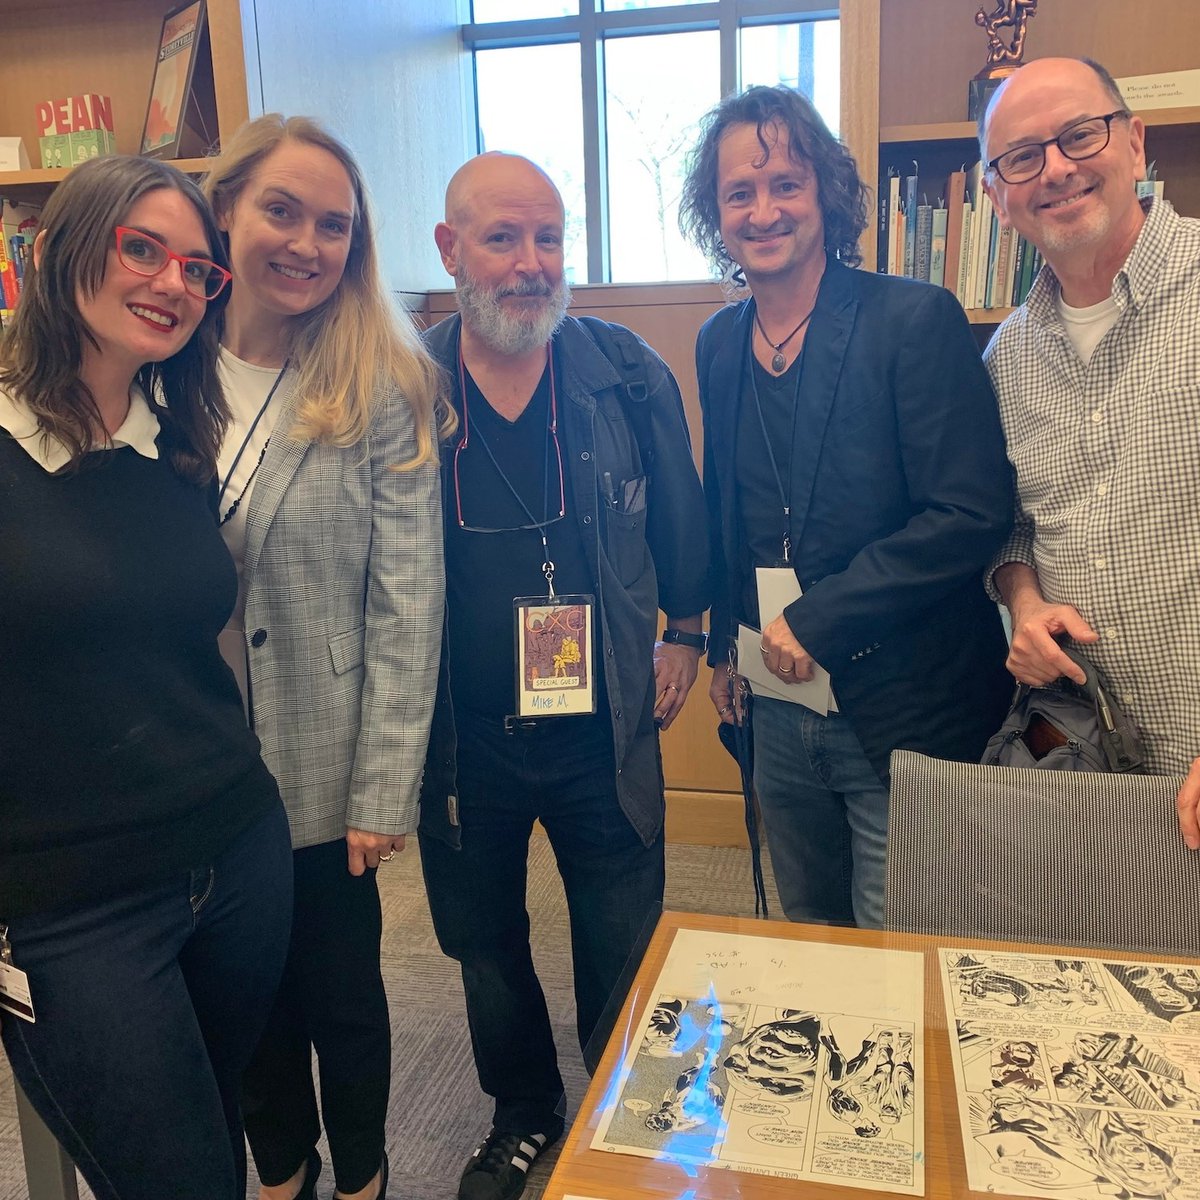 Want to hang out with Jeff Smith for a day? Help us meet our fundraising goal to preserve comics history! For a donation at the $5,000 level, you and up to four friends can hang out with BONE cartoonist @jeffsmithsbone at the Cartoon Library! Details: go.osu.edu/sfaca